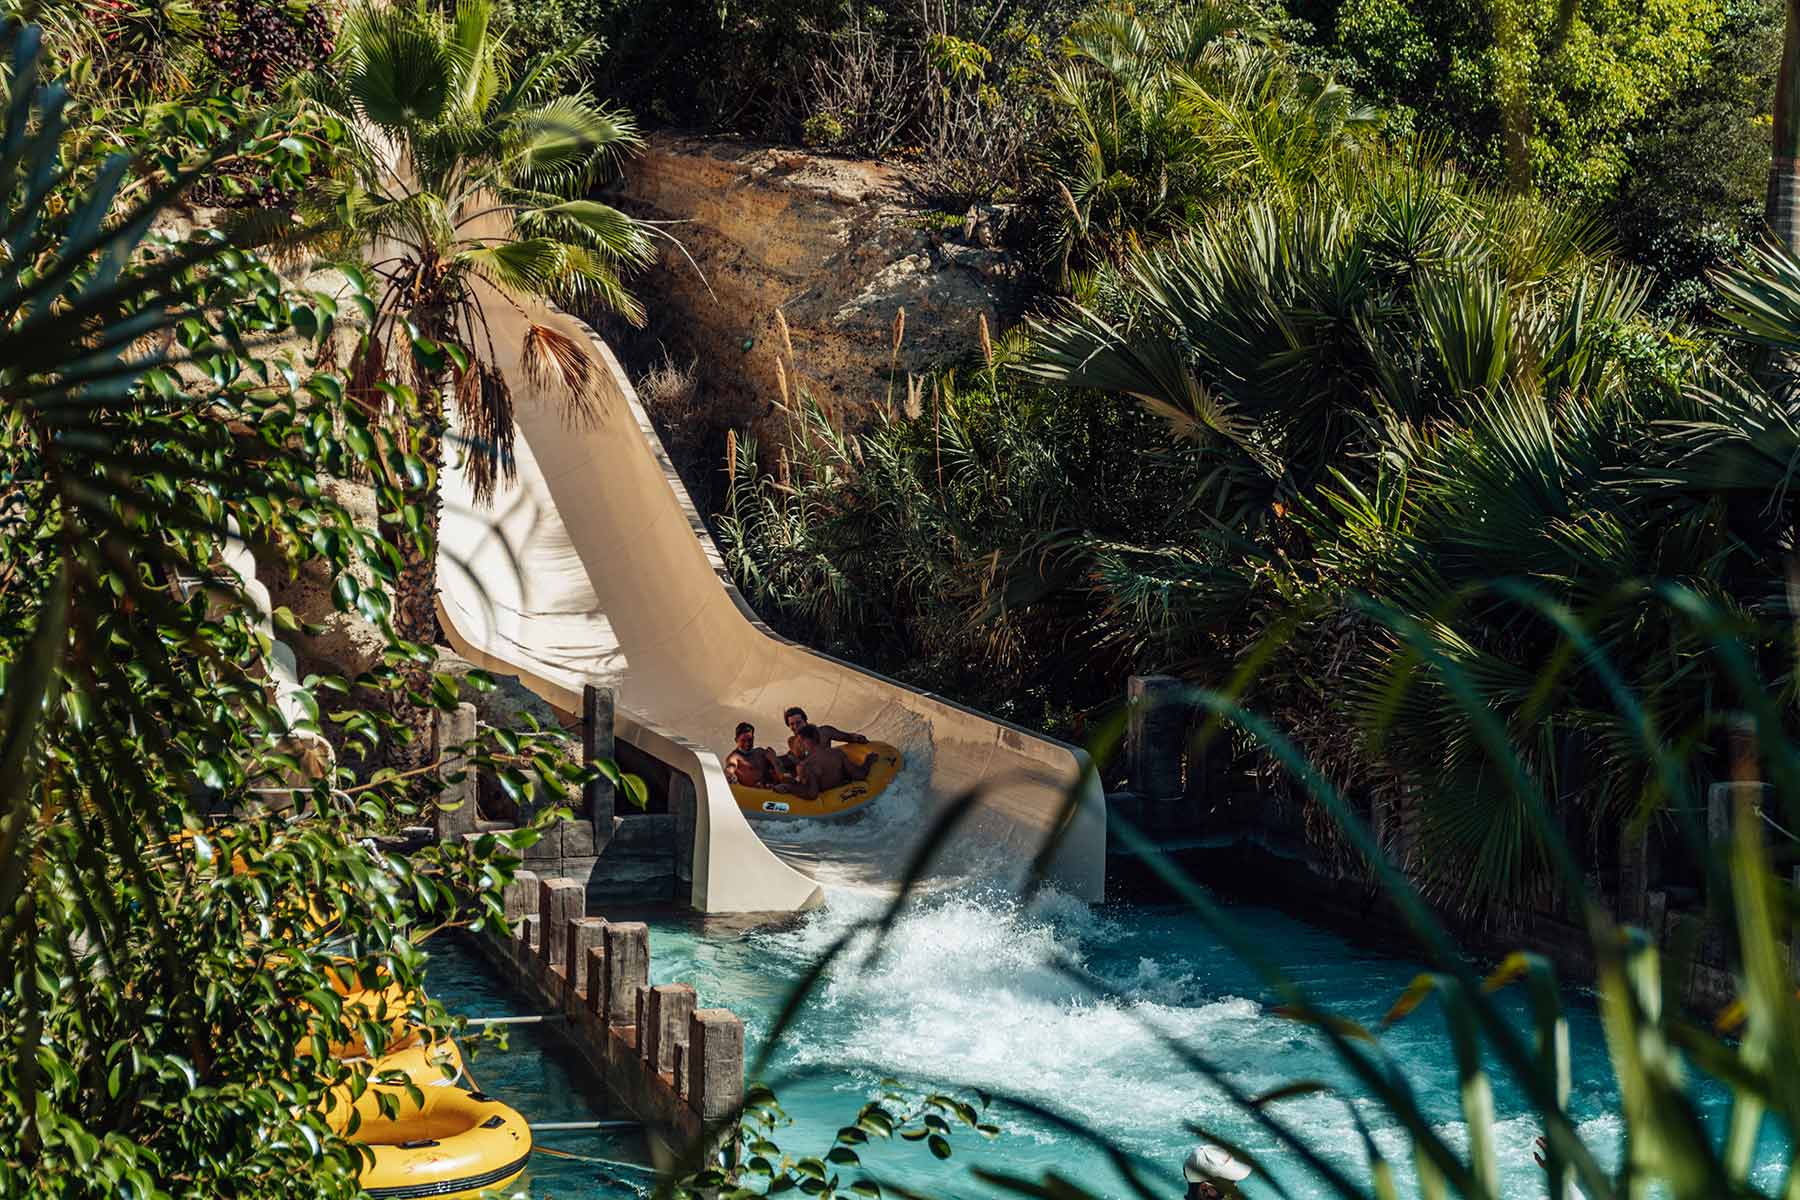 A water slide in Siam Park